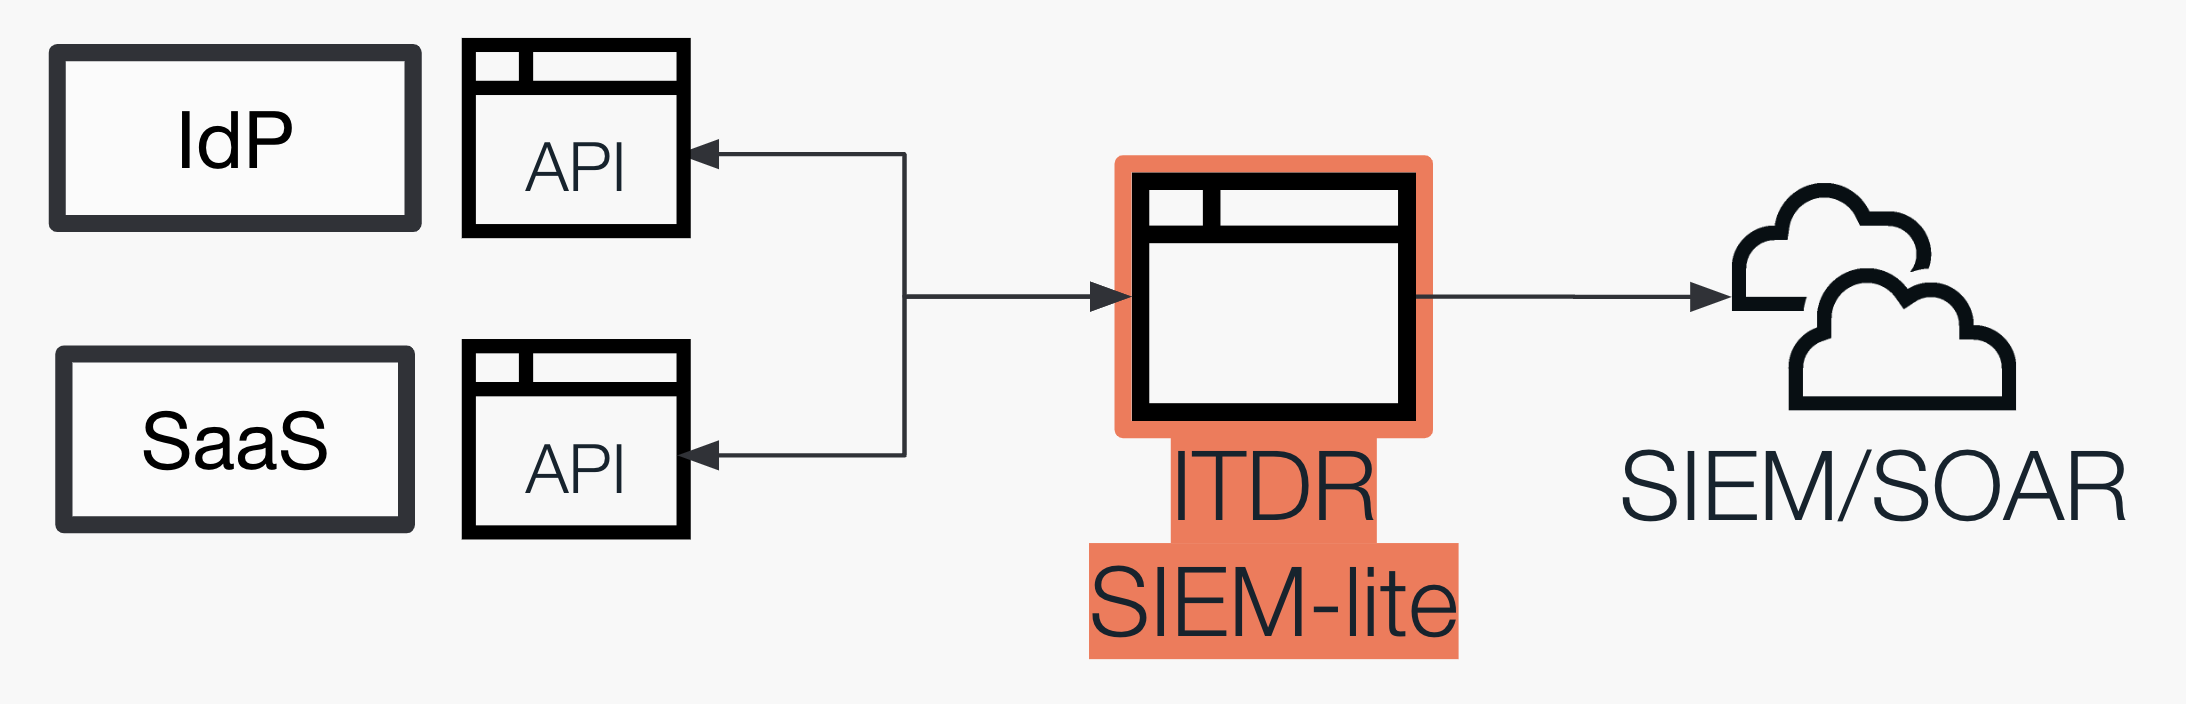 ITDR graphic showing the position of SIEM-lite solutions